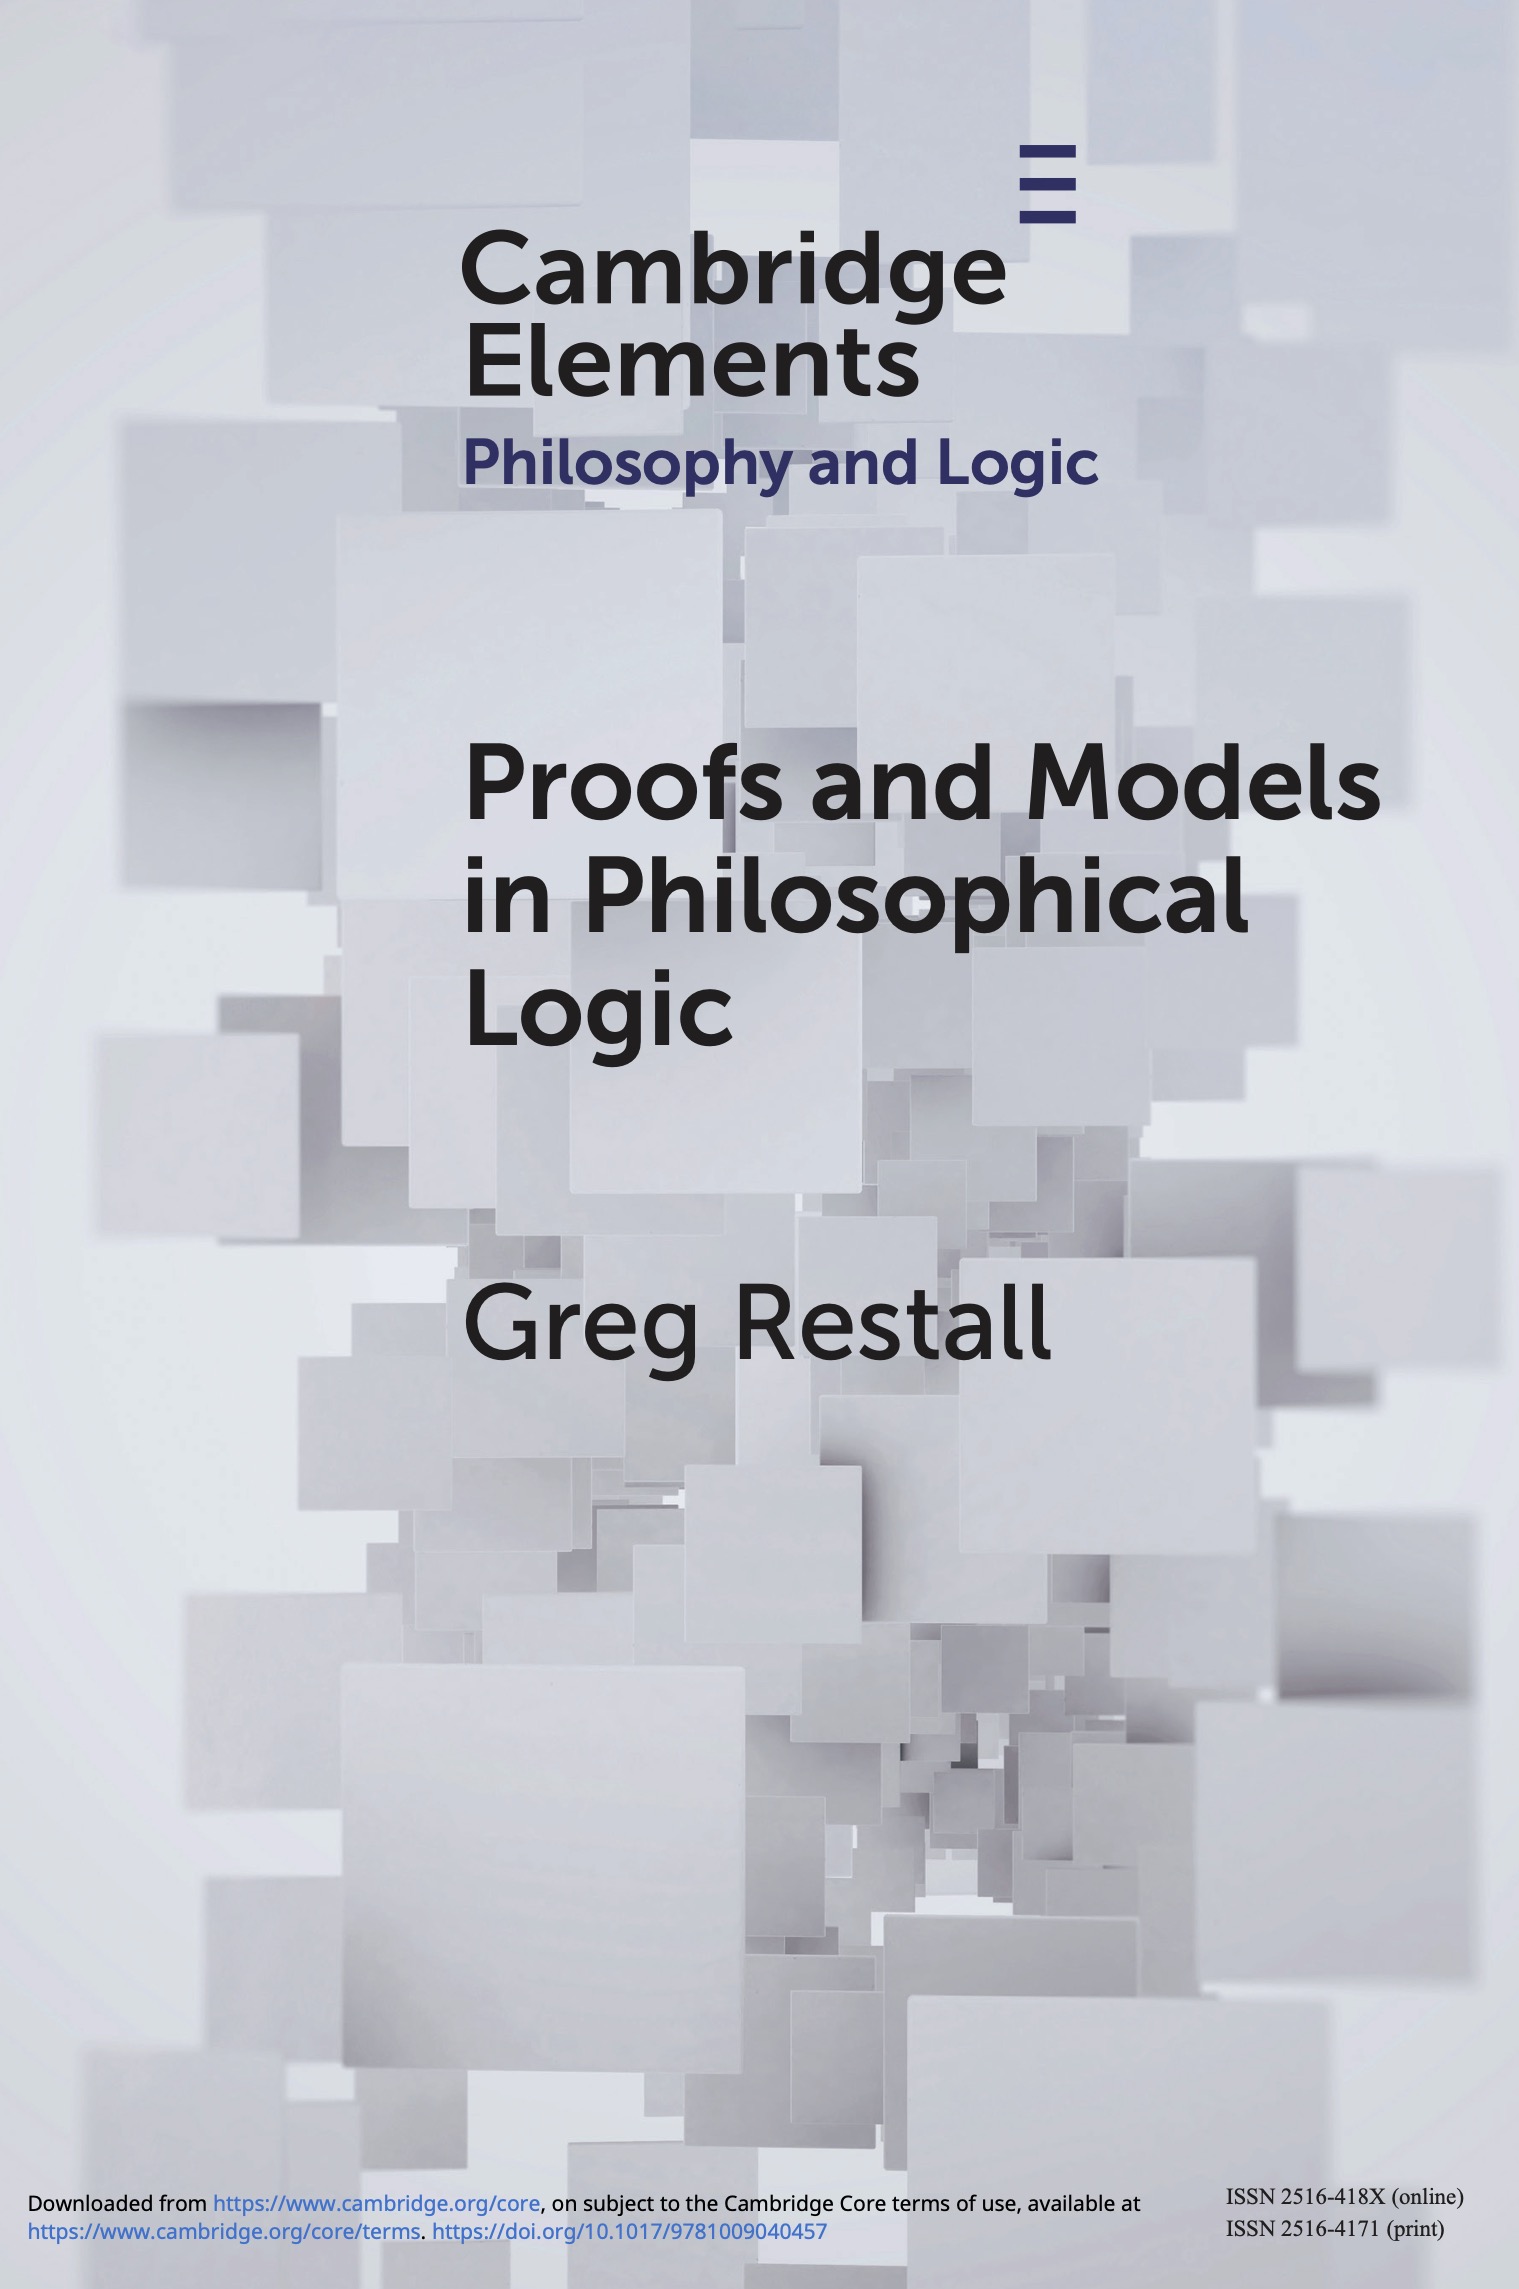 The cover of Proofs and Models in Philosophical Logic